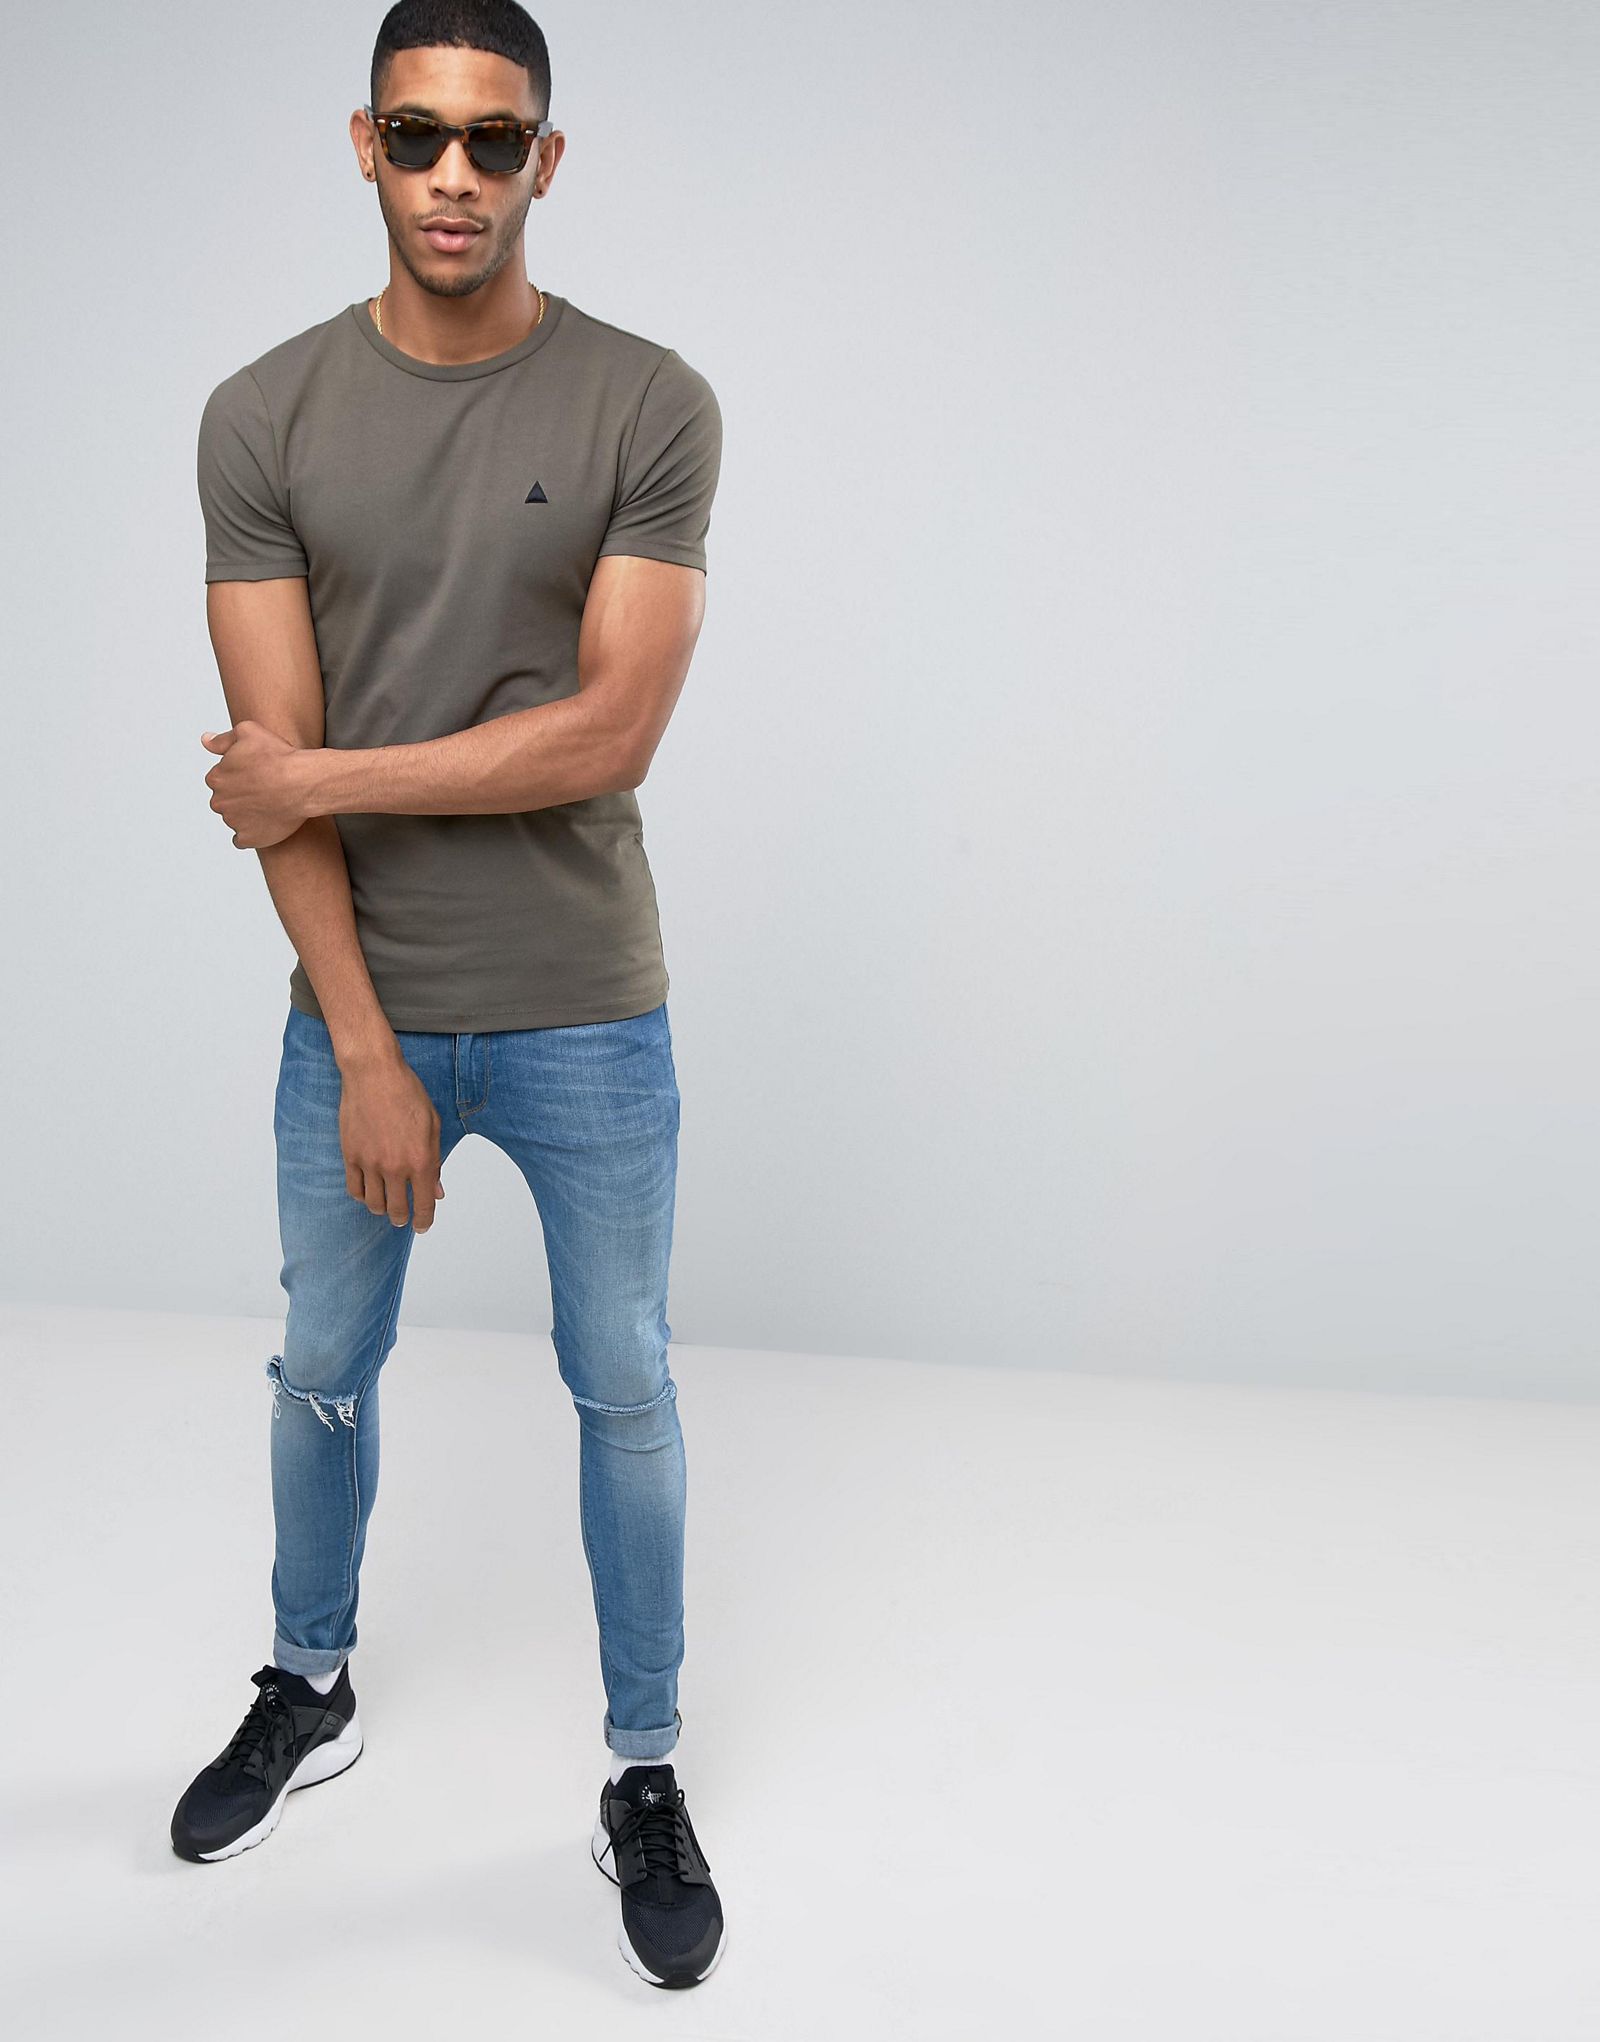 ASOS Extreme Muscle T-Shirt With Logo In Khaki